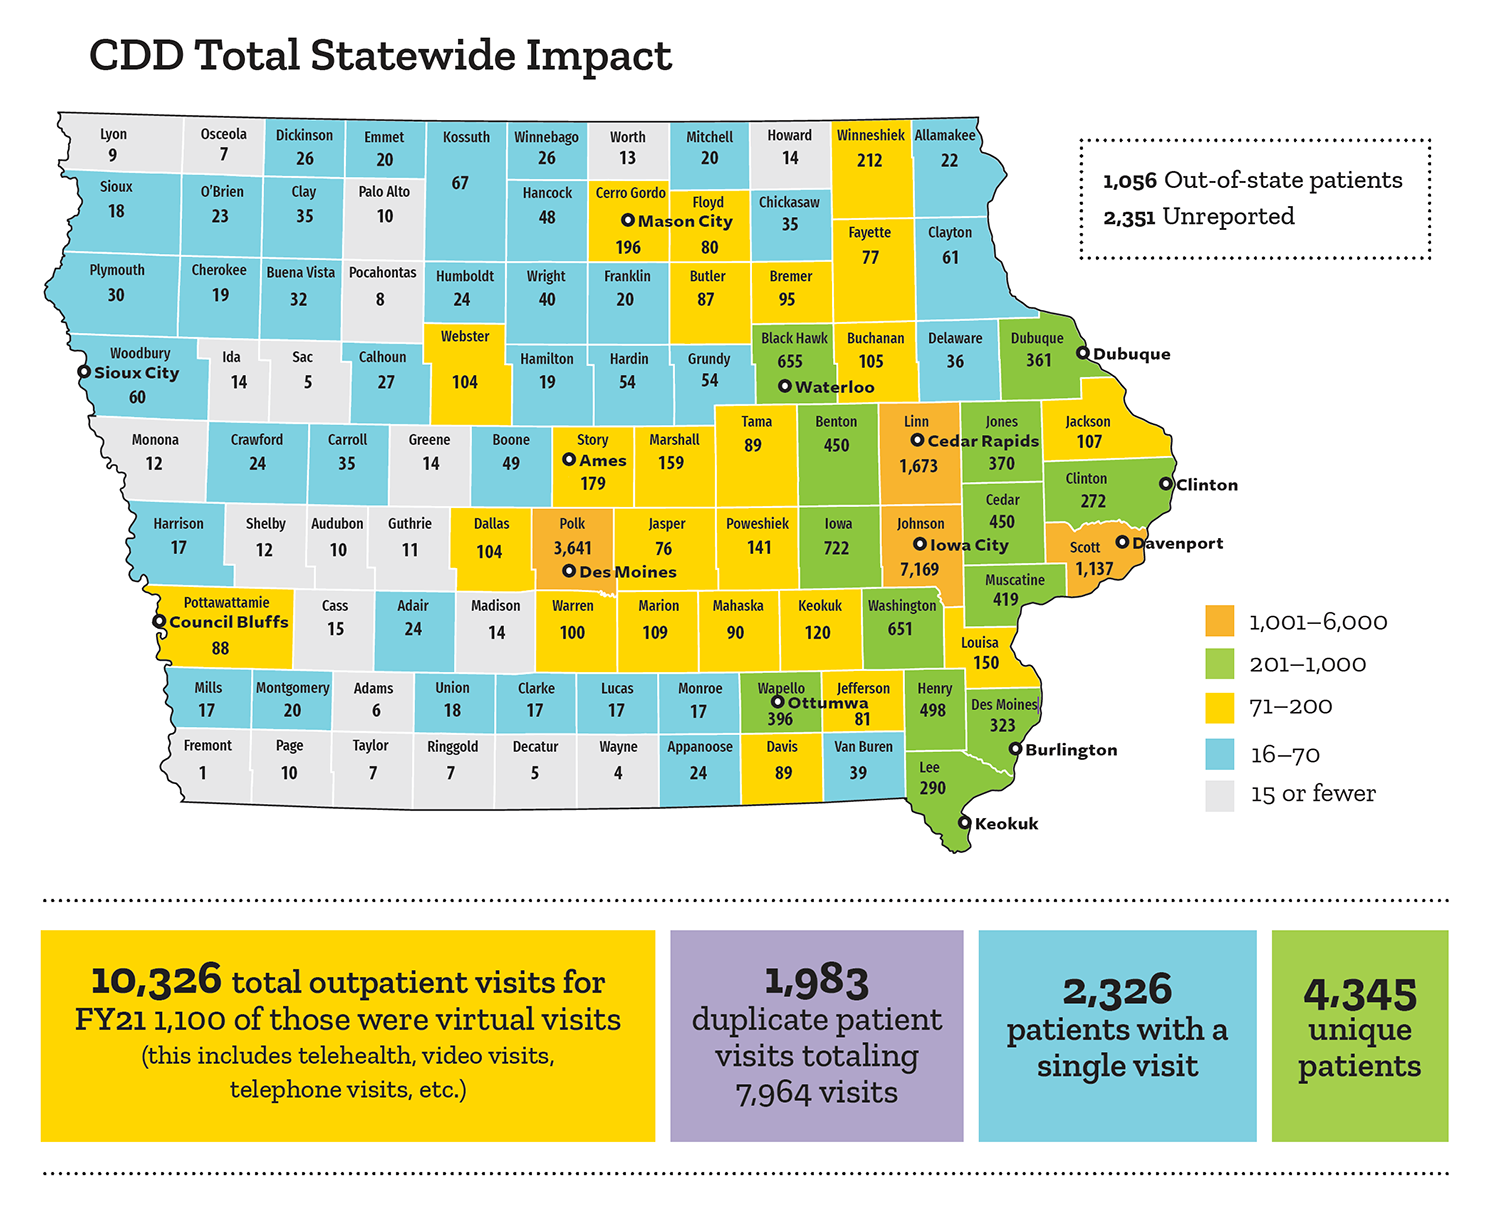 Map demonstrating the statewide impact that CDD has over Iowa's 99 counties